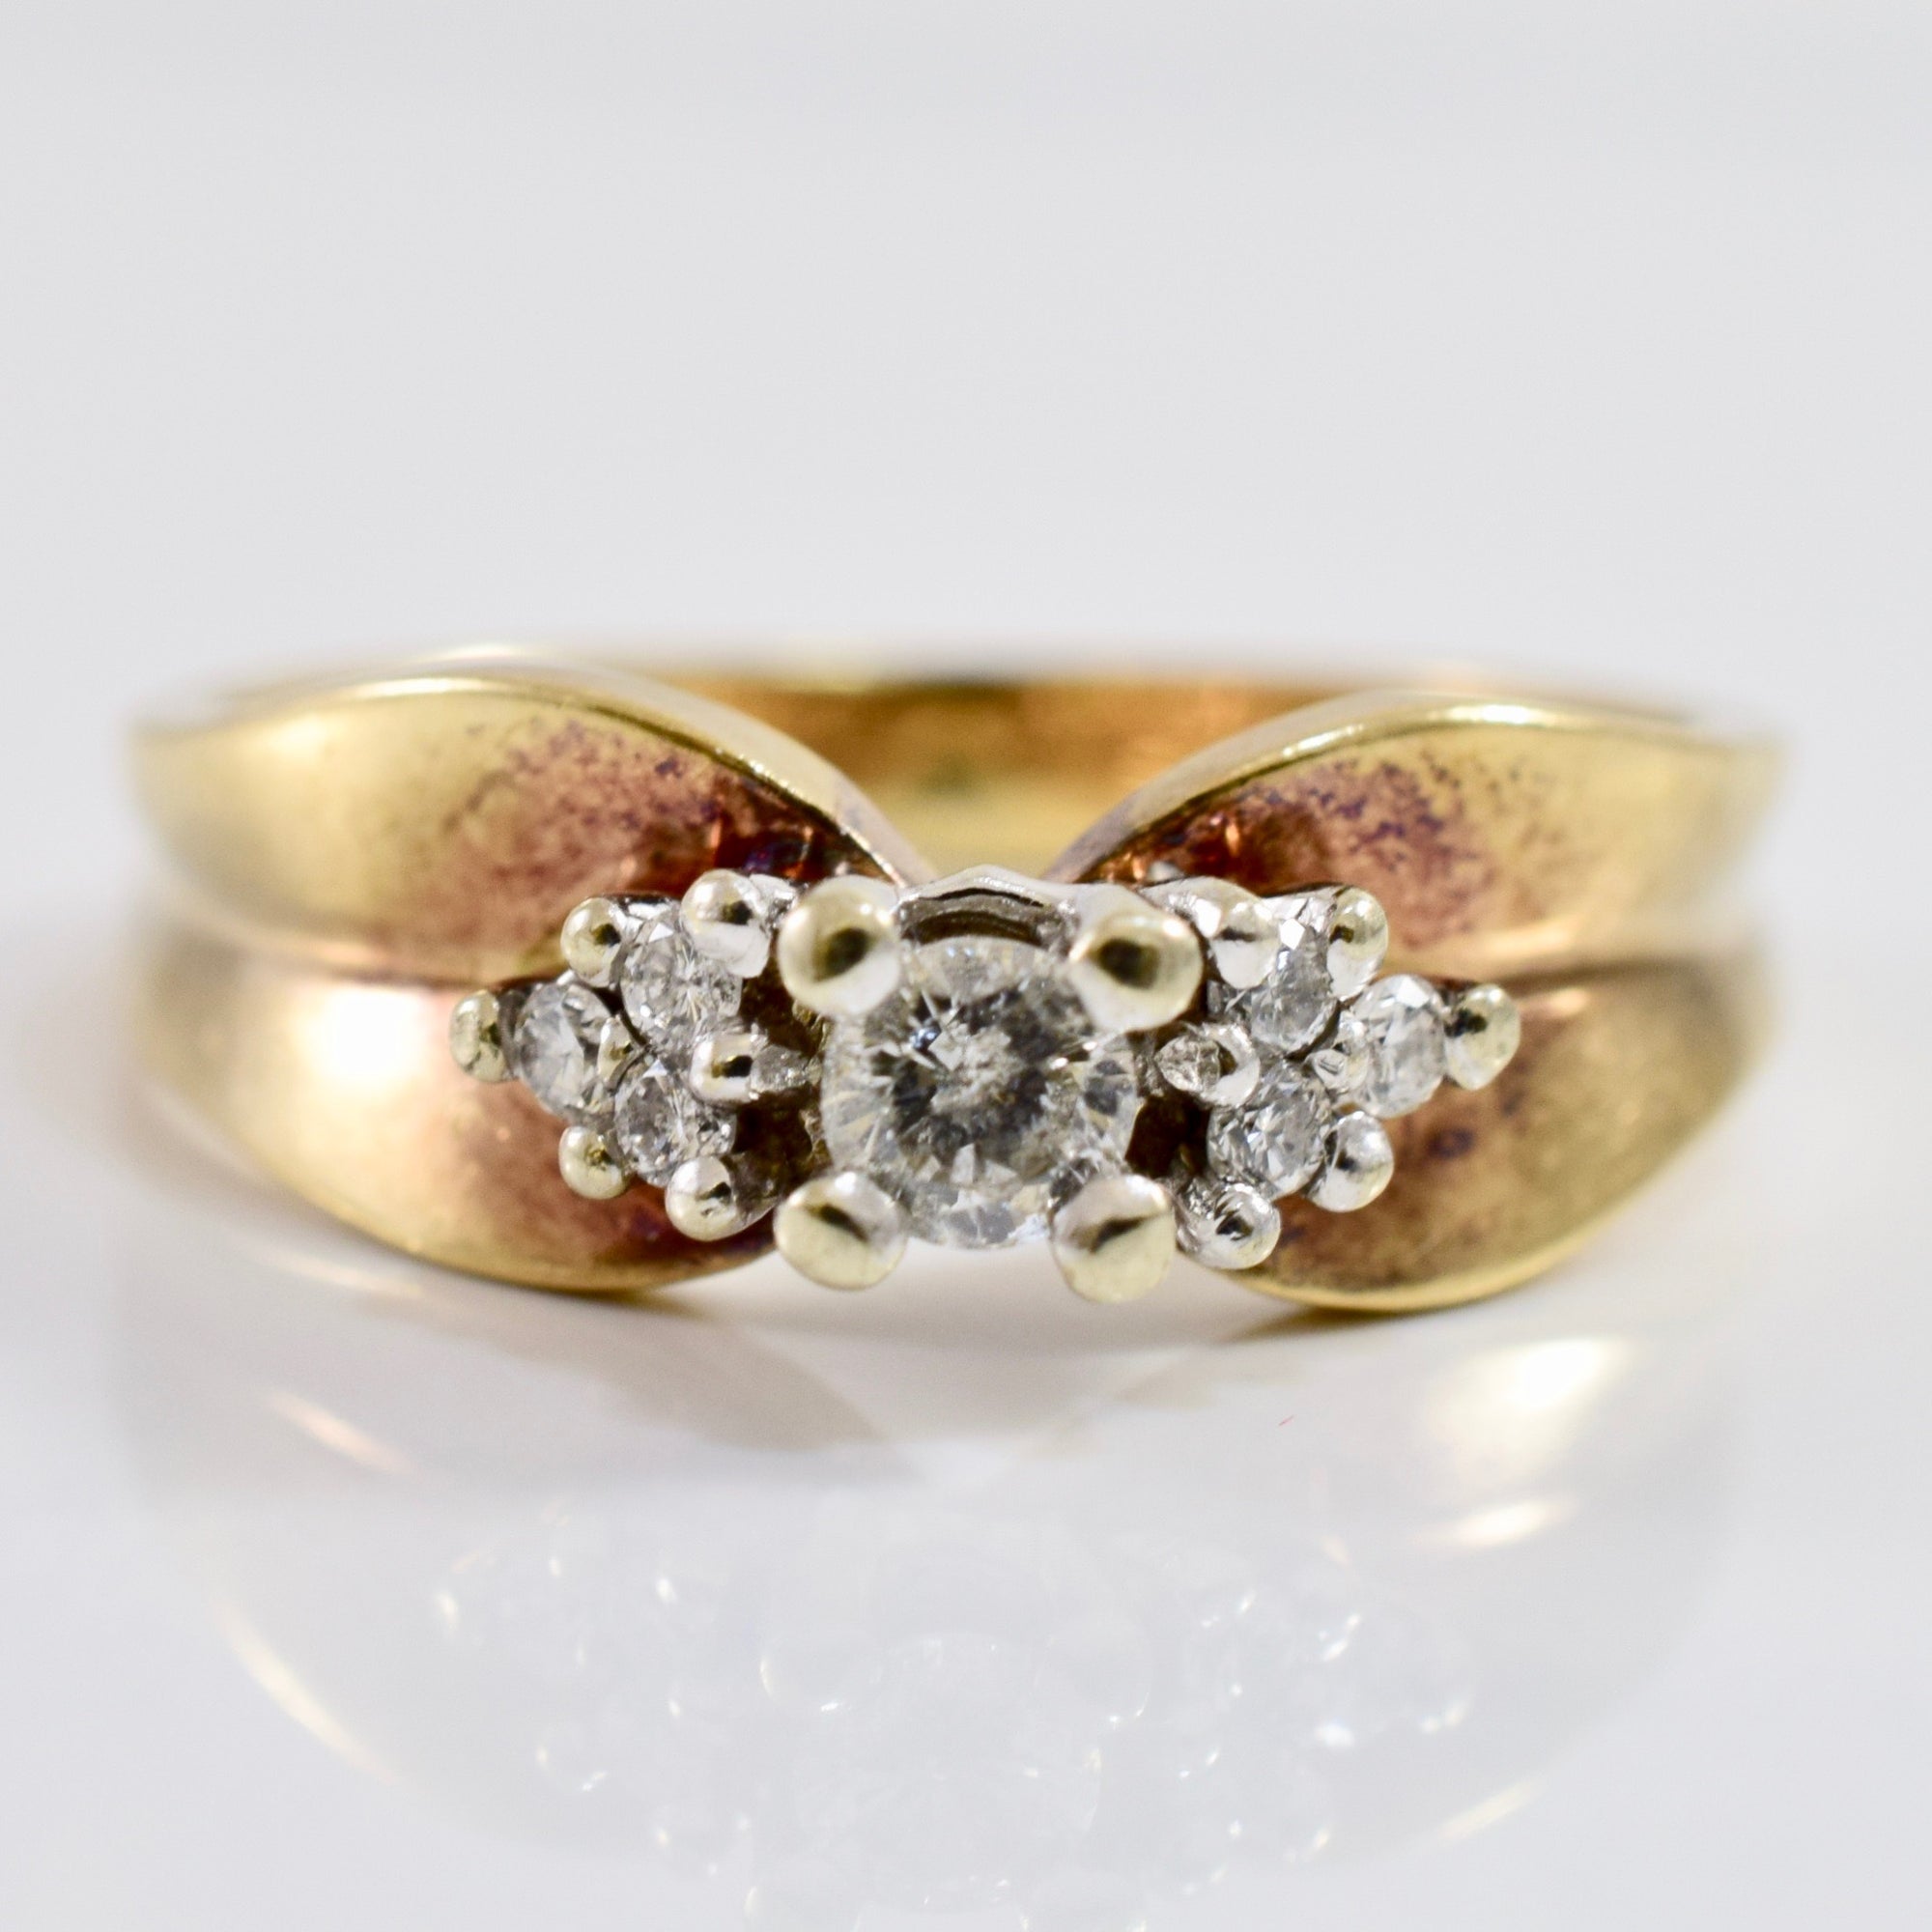 Diamond Ring with Cluster Accent Stones | 0.19 ctw SZ 6 |